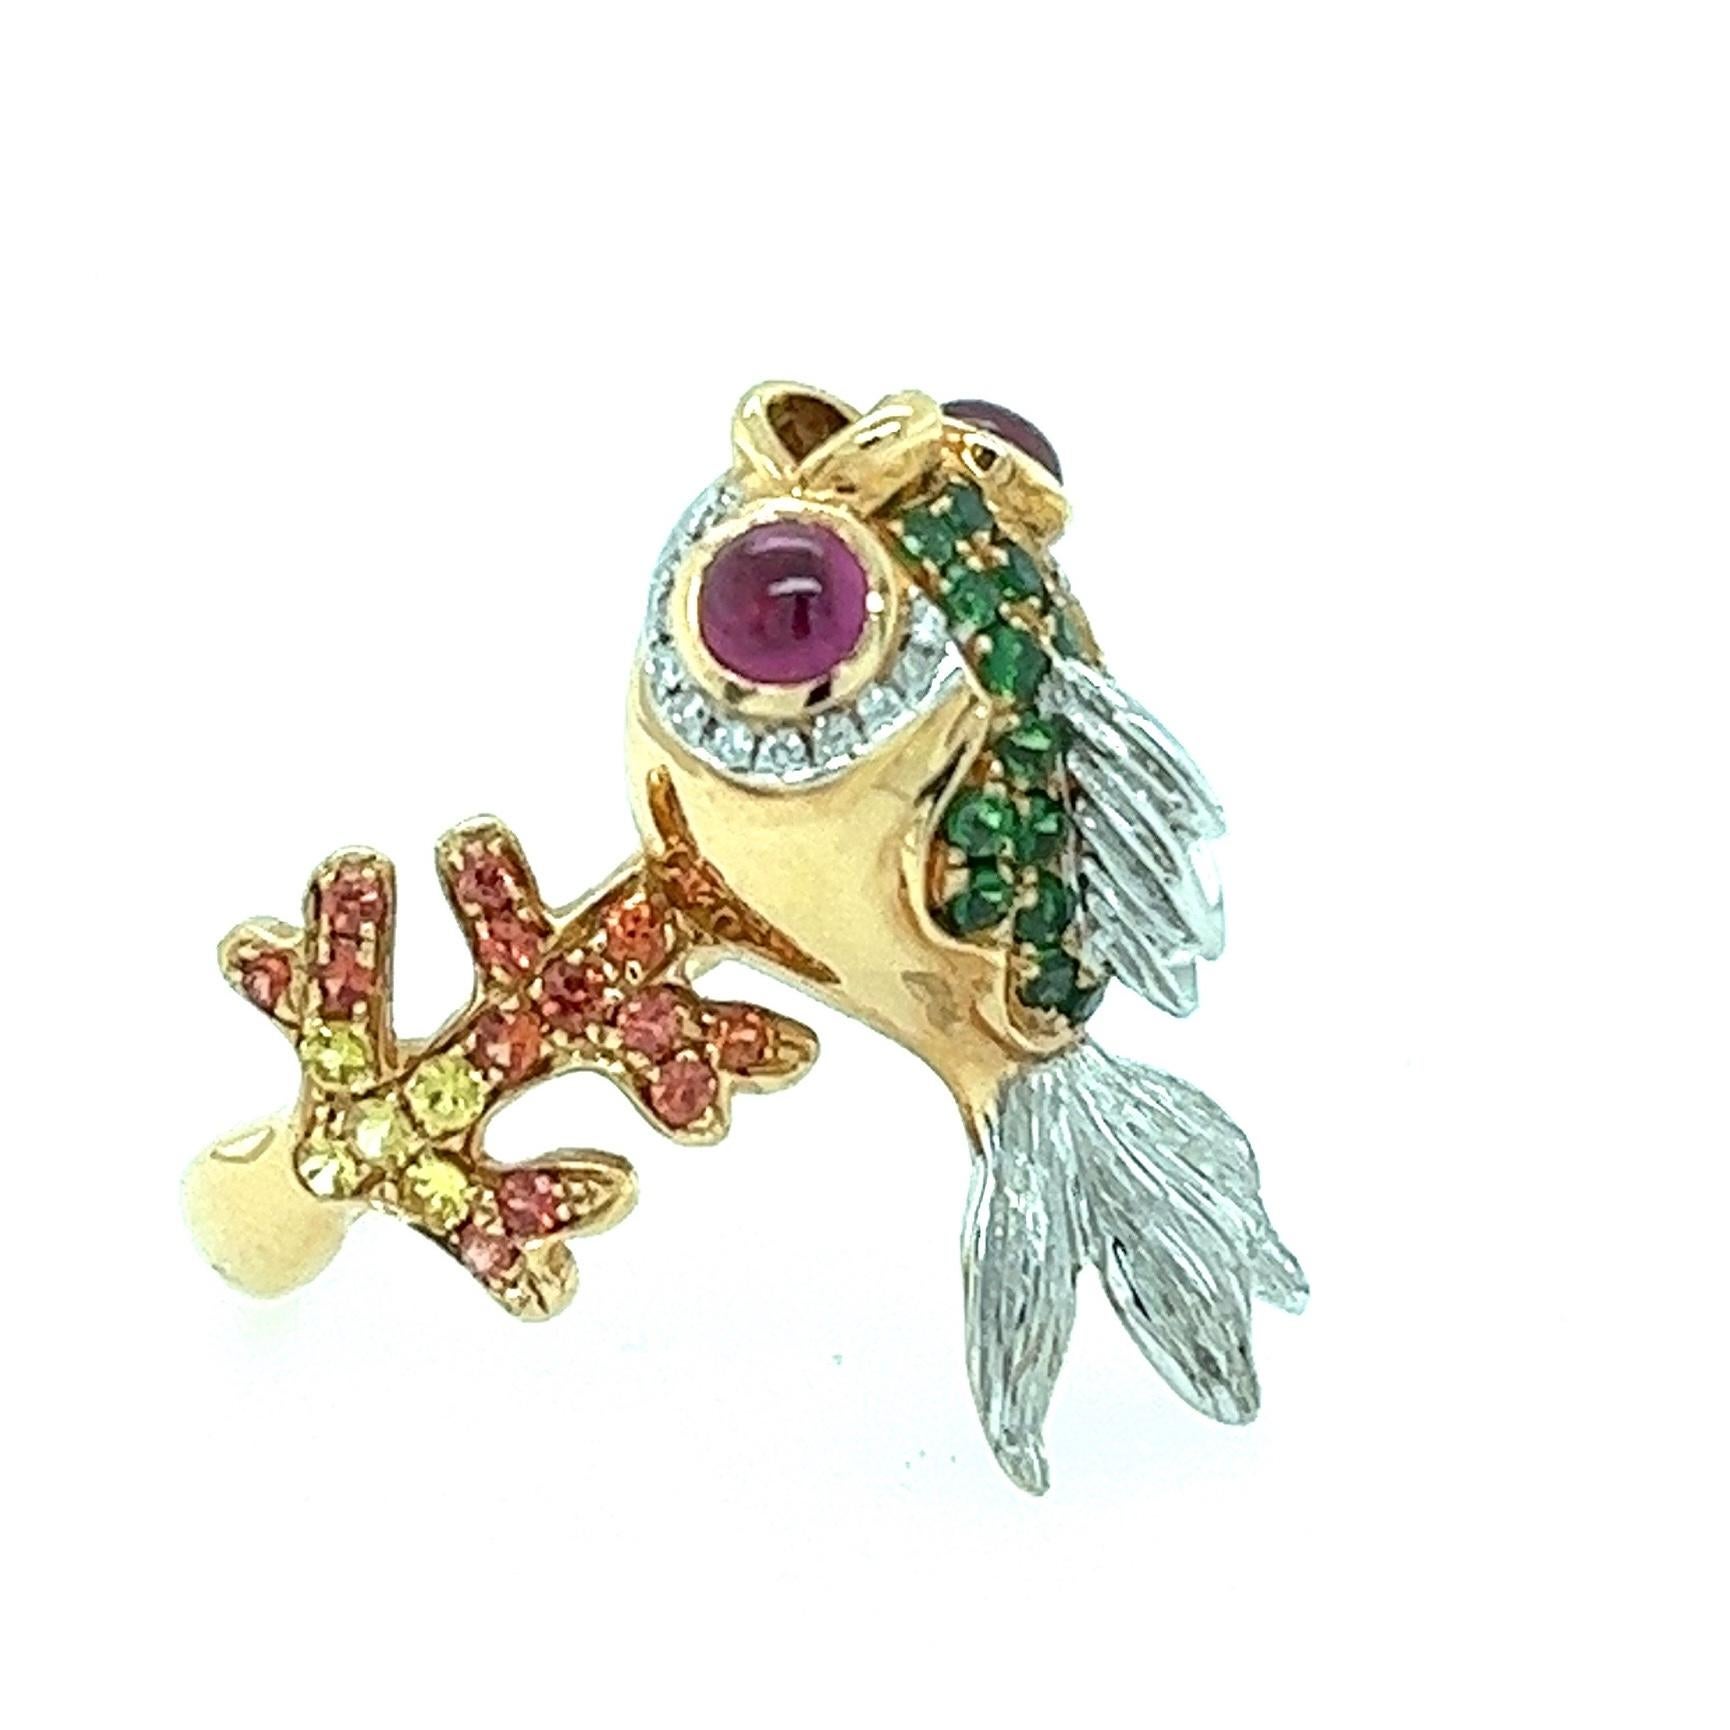 18K Rose Gold Orange Sapphire & Ruby Gold Fish Ring with Diamonds

22 Diamonds - 0.10 CT
19 Green Garnets - 0.43 CT
34 Orange Sapphires - 0.62 CT
2 Rubies - 0.73 CT
18K Rose Gold - 8.40 GM

This adorable and exquisite goldfish-shaped ring is crafted